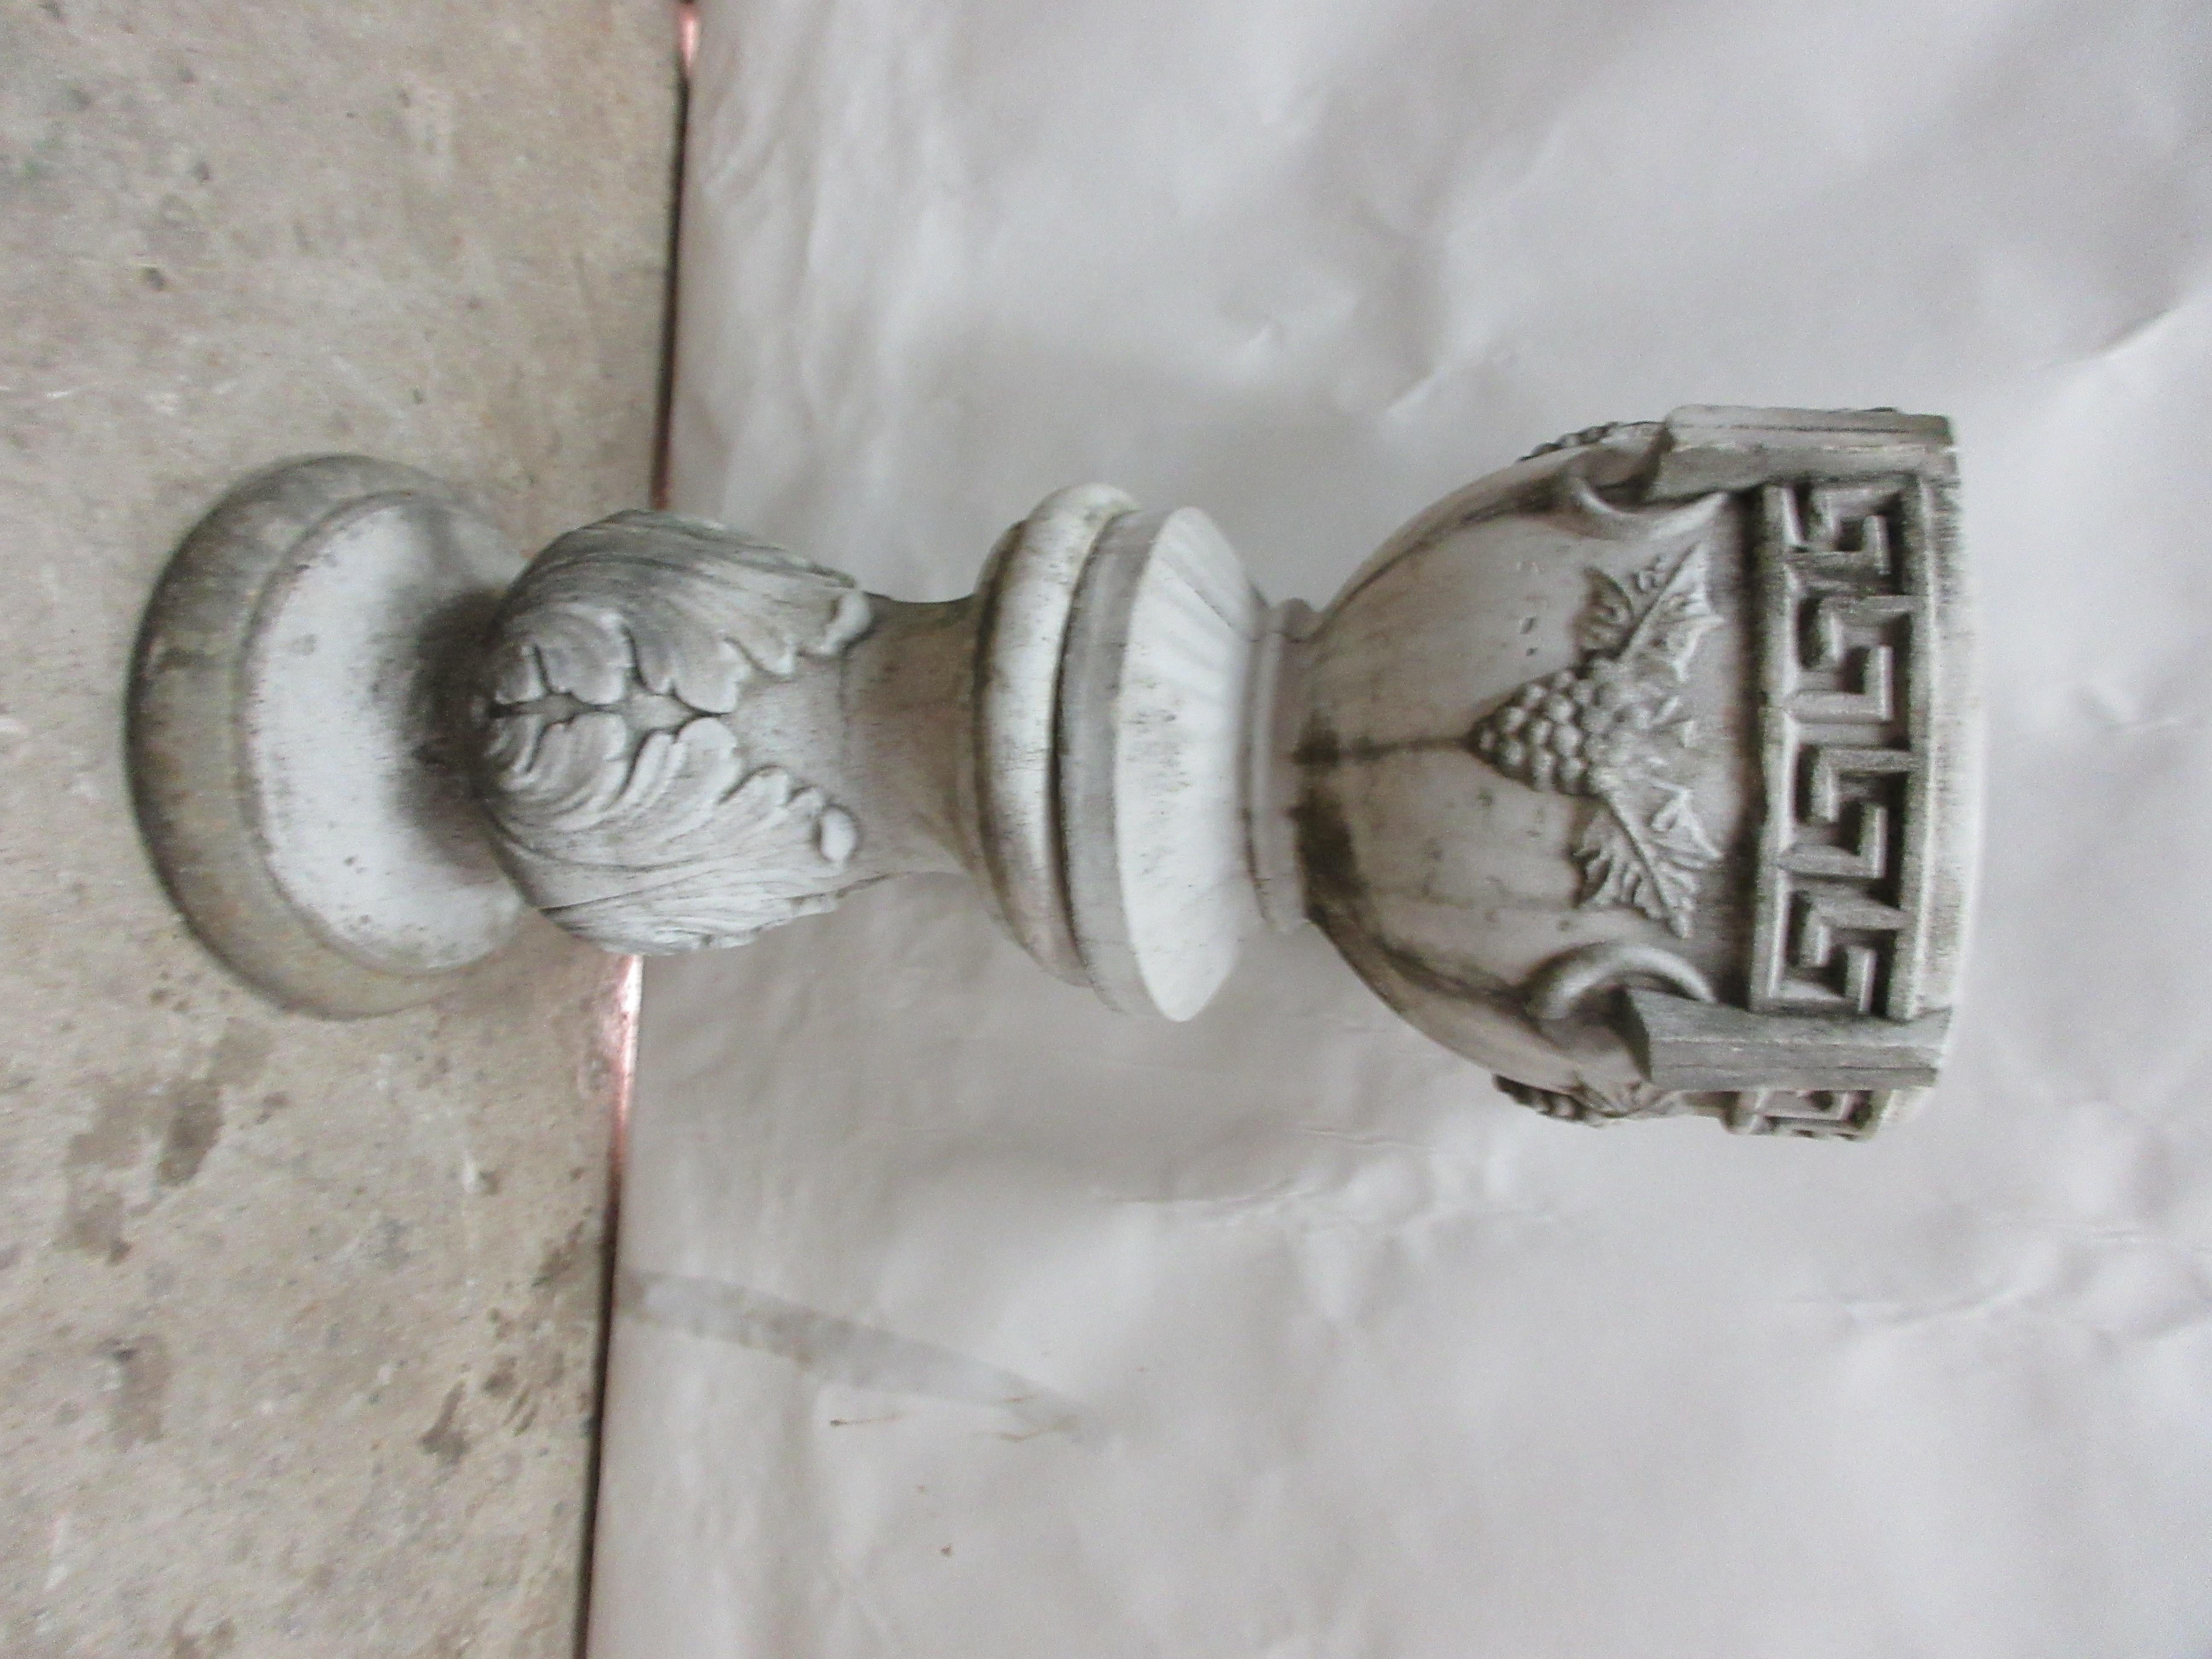 This Urn and pedestal was found at an Estate auction in Palm Beach Florida.
the Pedestal is marked 